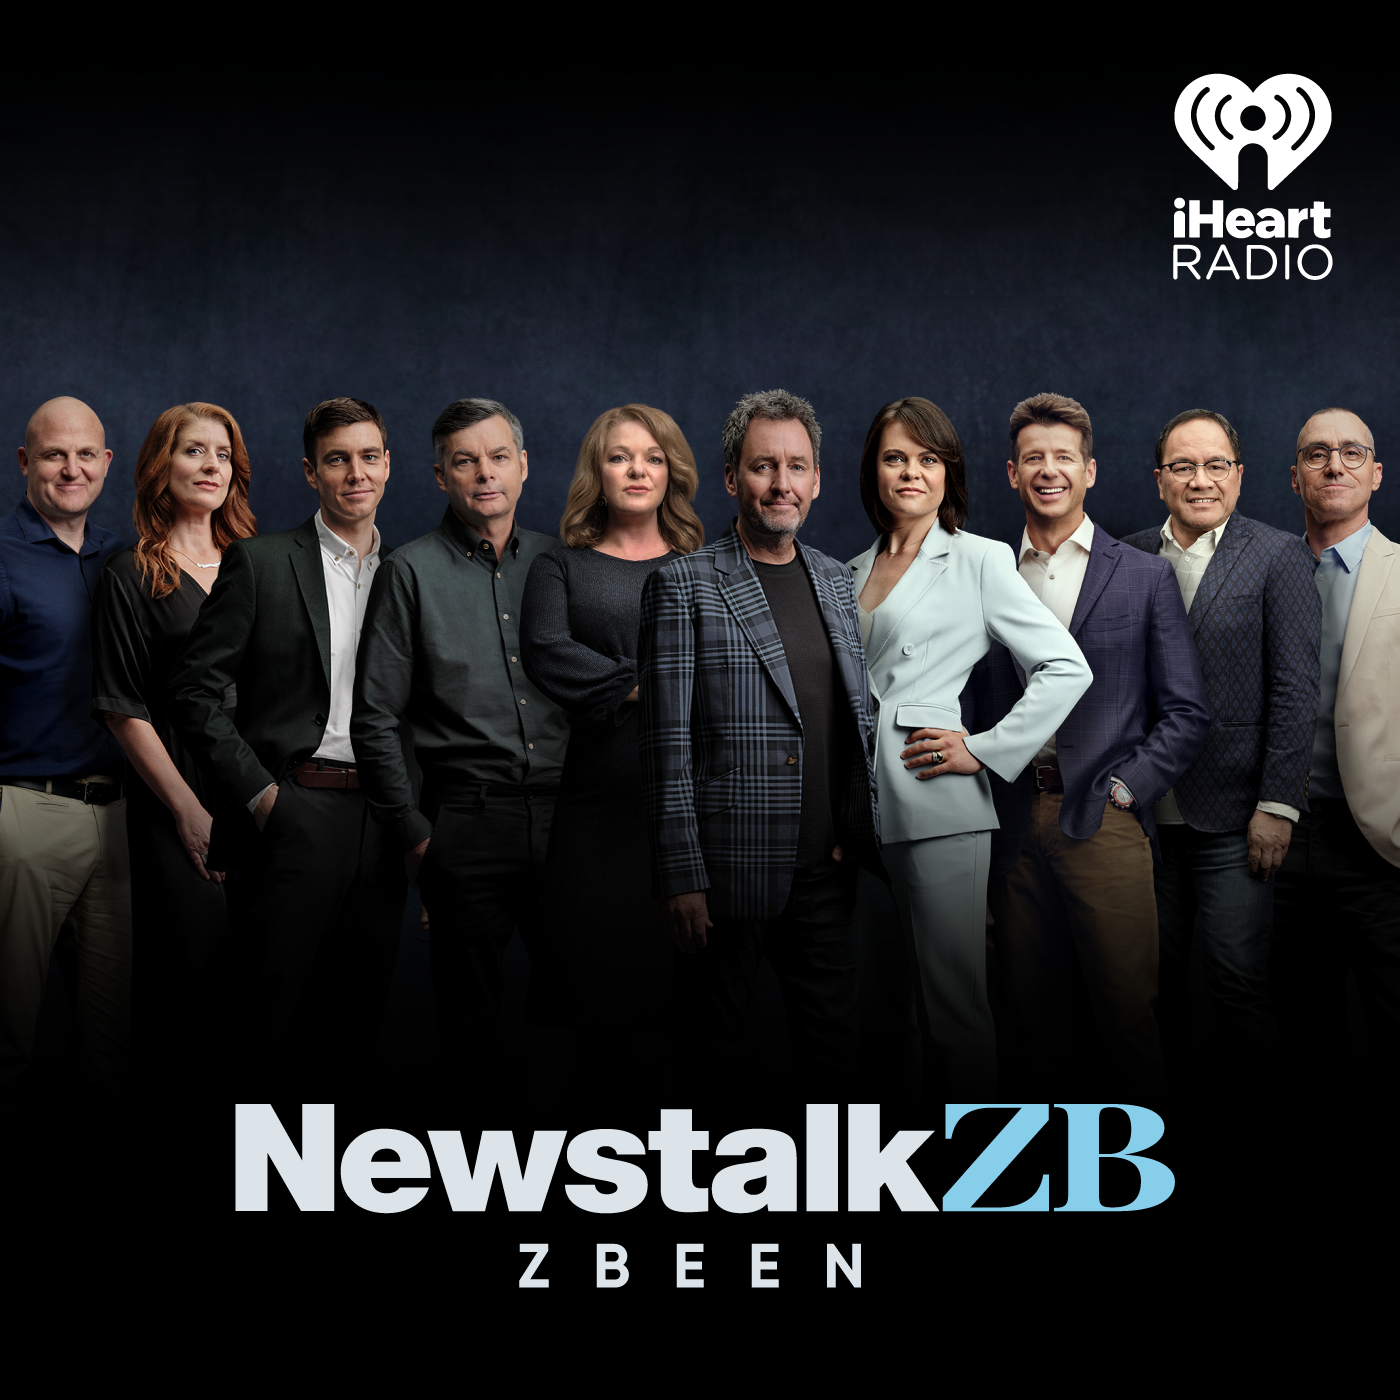 NEWSTALK ZBEEN: Debates Are Just So Overrated